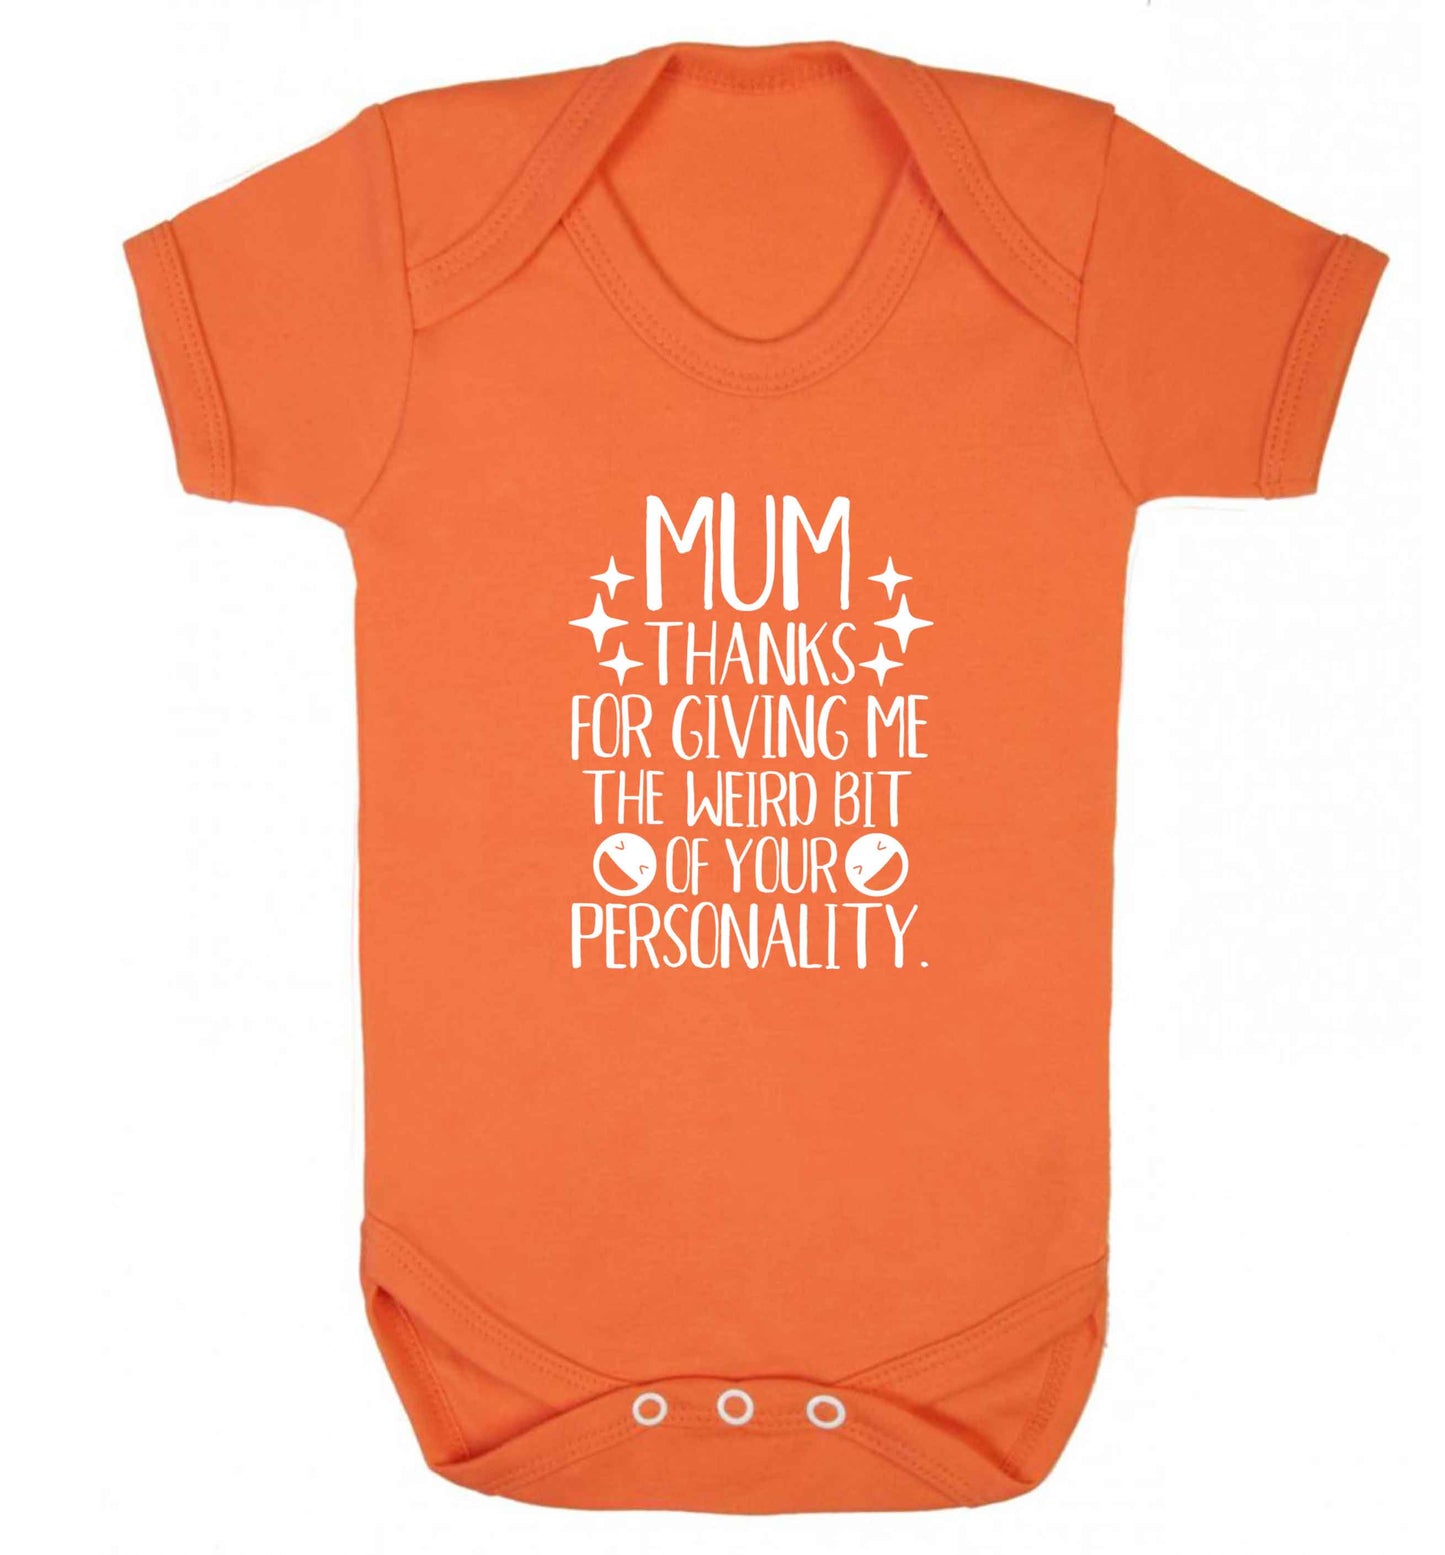 Mum thanks for giving me the weird bit of your personality baby vest orange 18-24 months